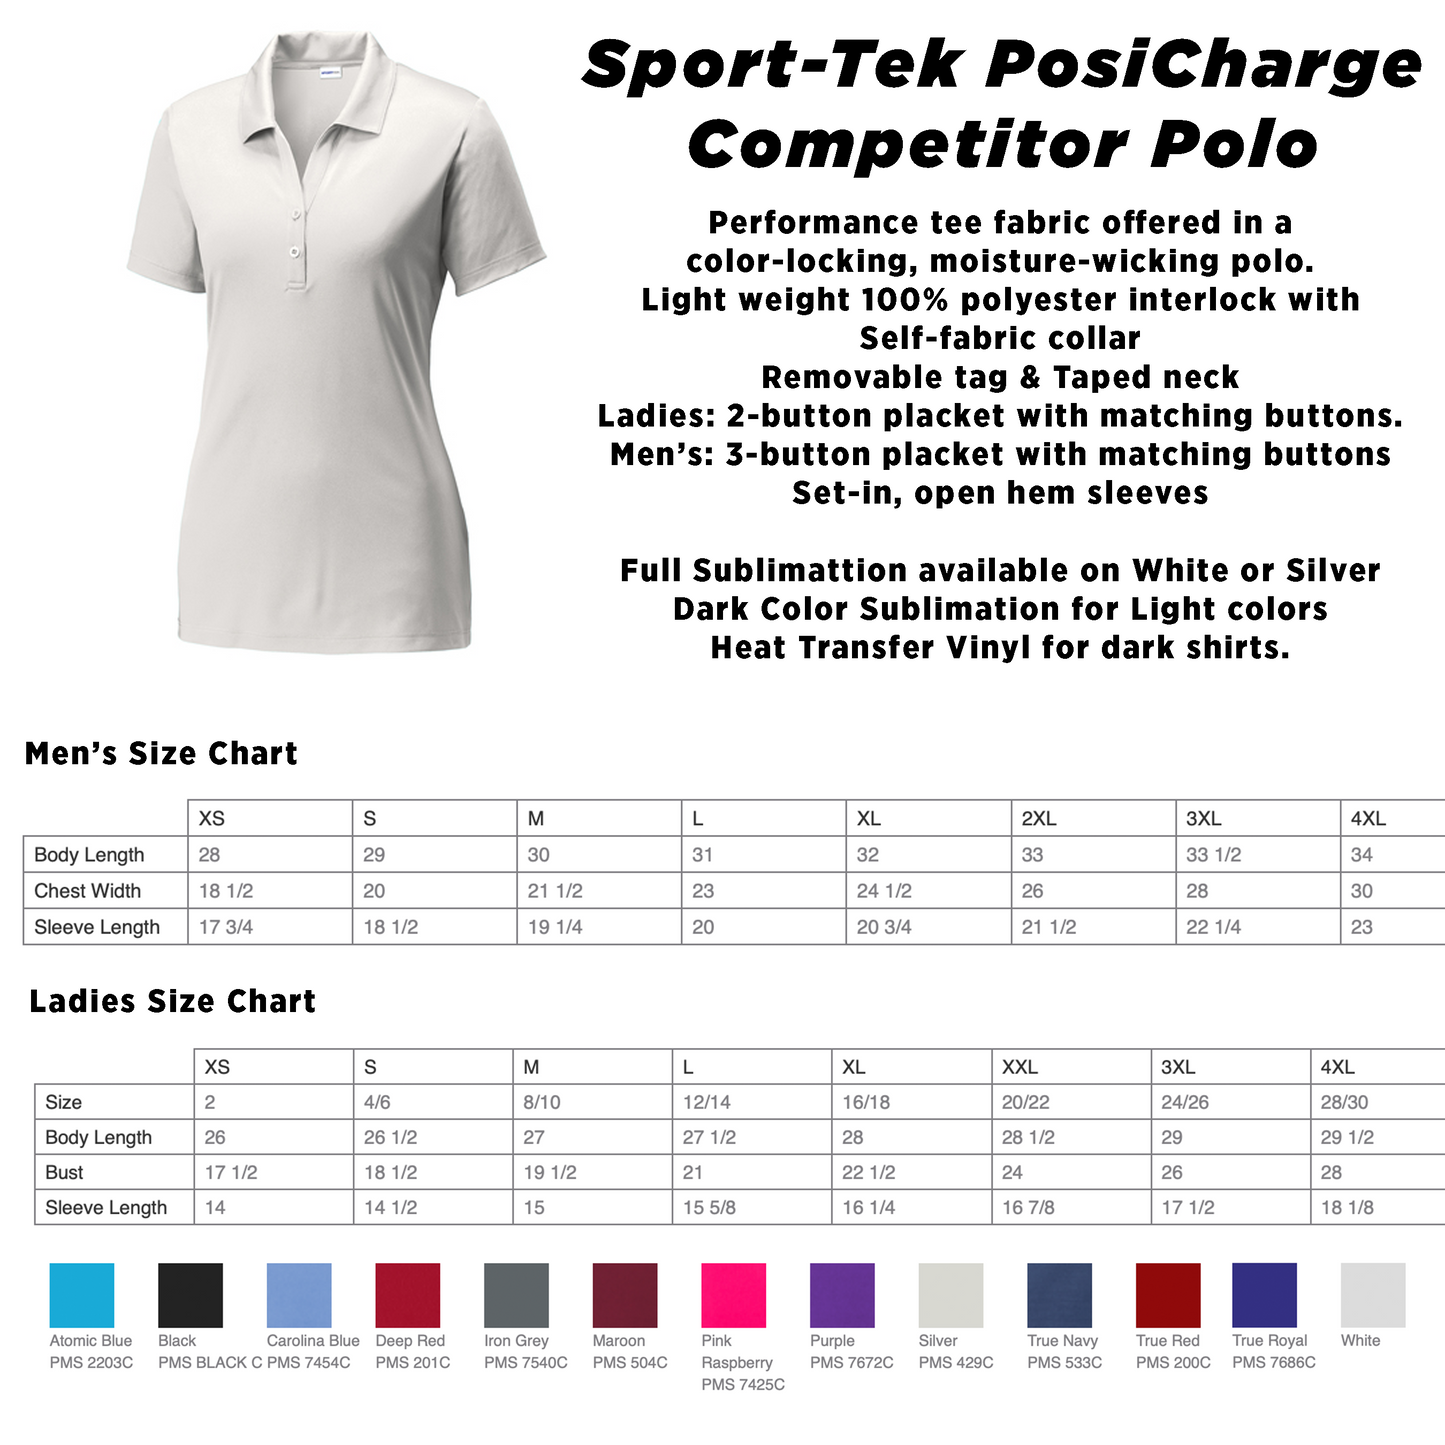 Performance Polos -STOP Moms for Liberty